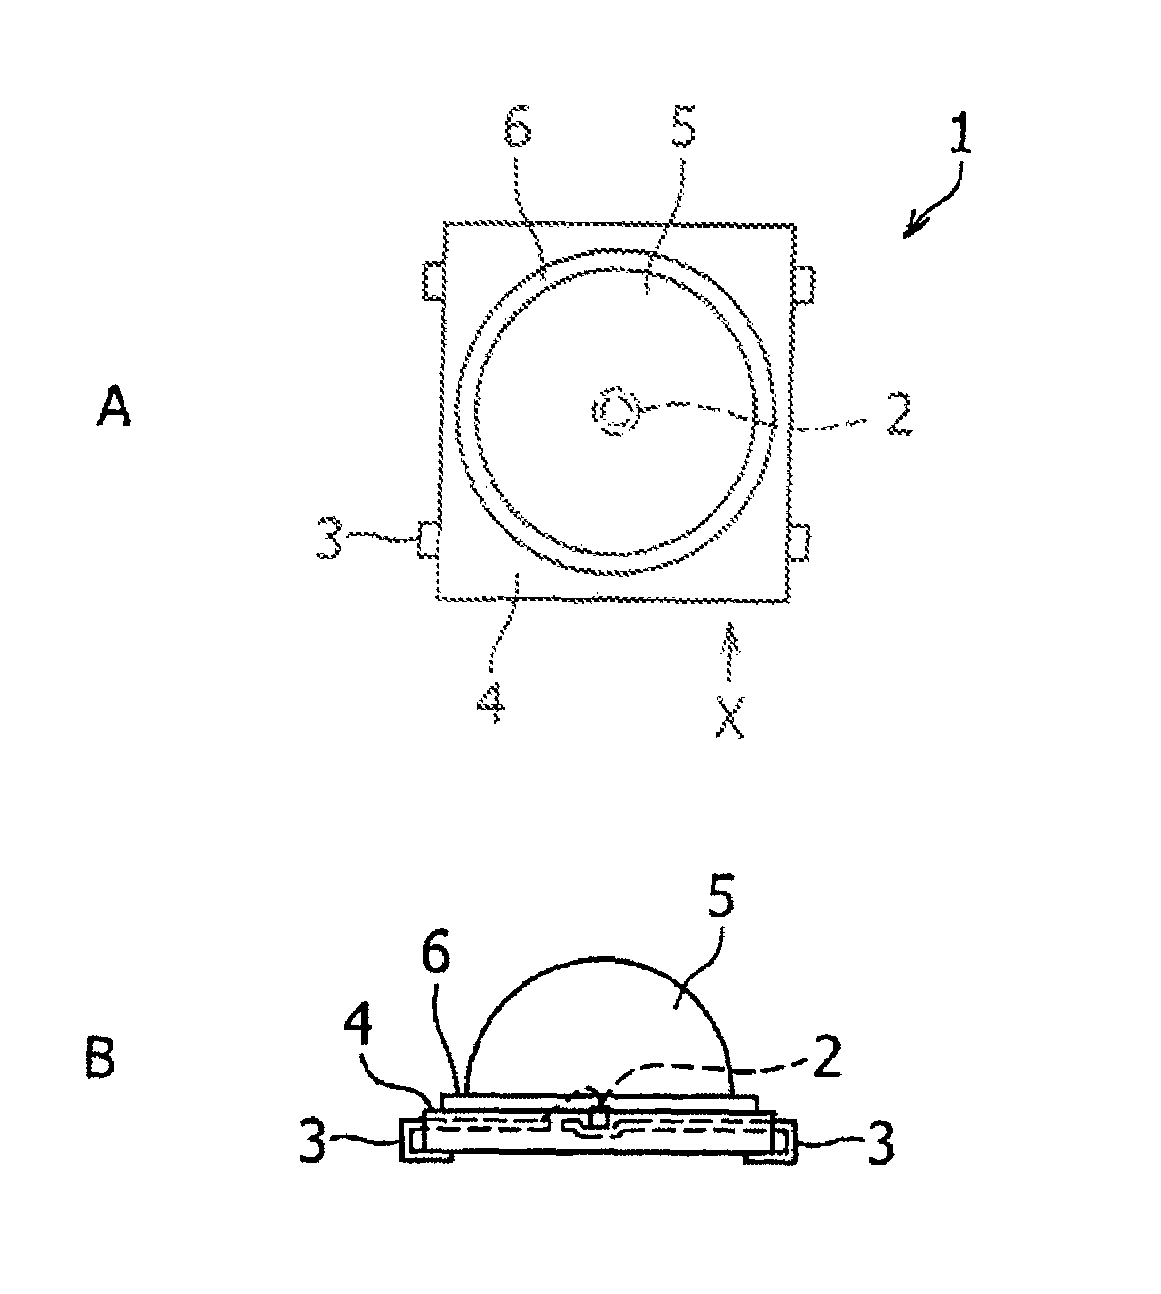 Light emitting diode with a step section between the base and the lens of the diode